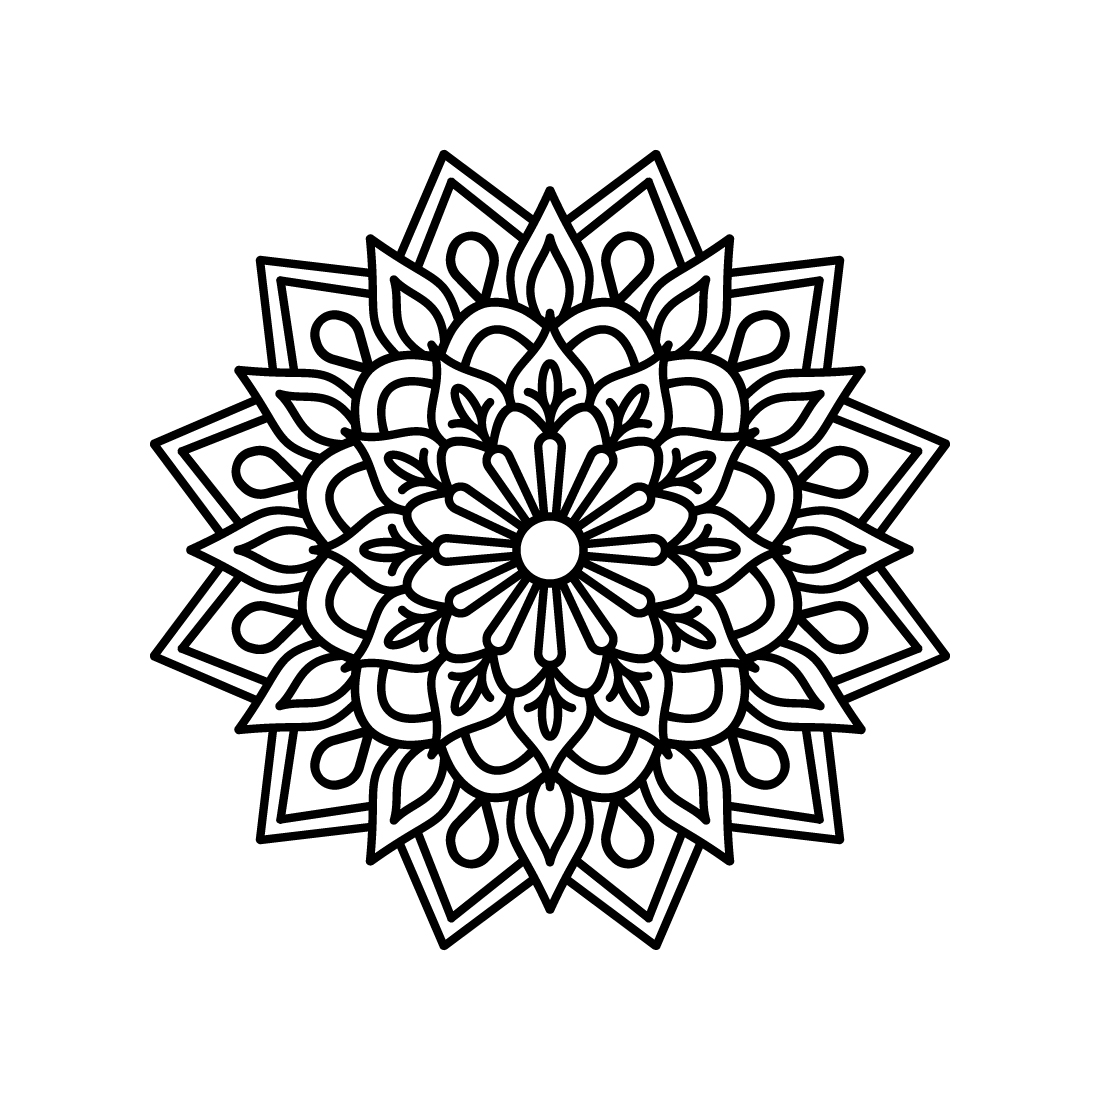 Bundle of 10 Relaxation Mandalas for Paper Cutting or Coloring Book preview image.